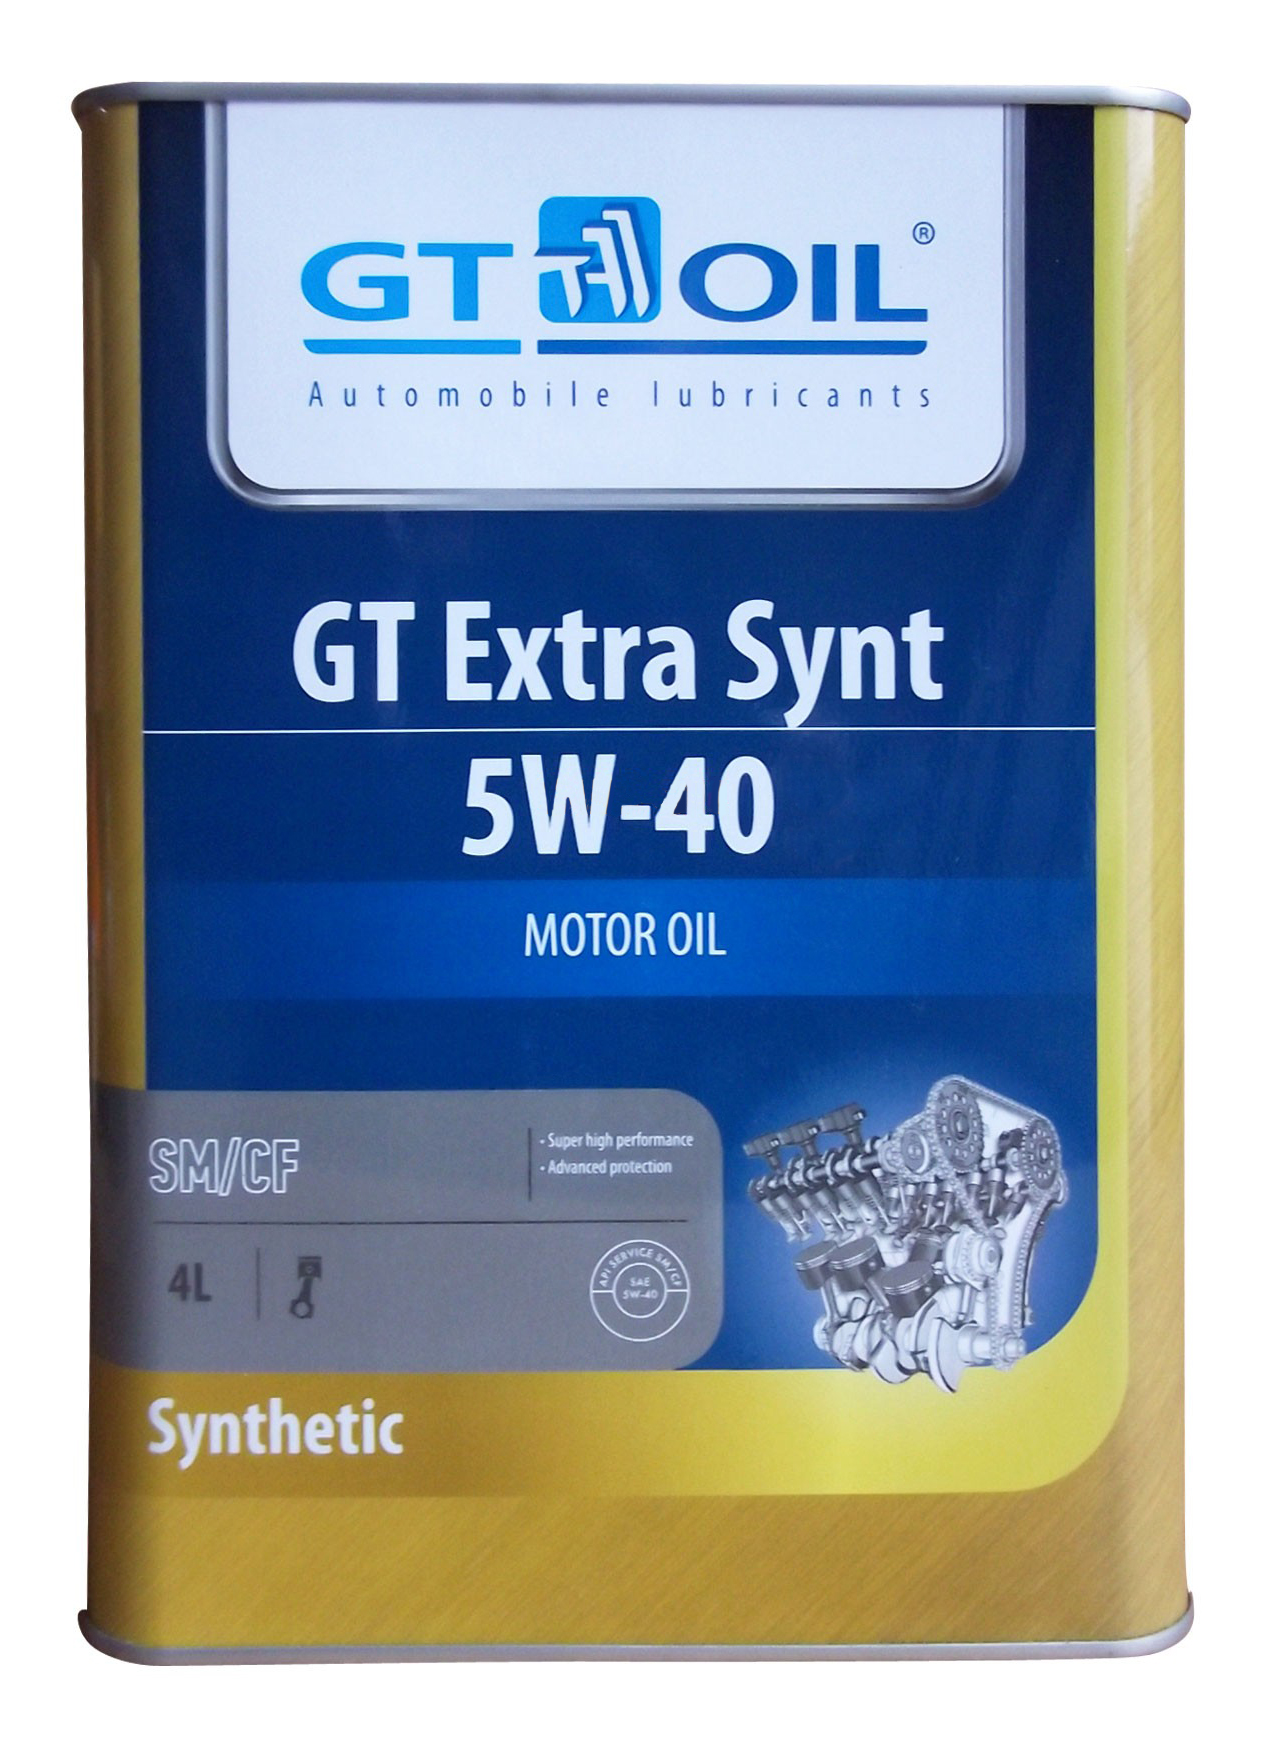 Масло джи ти. Gt Oil 5w40 Extra Synt. Gt Oil gt Extra Synt 5w-40. Gt Oil 8809059407417. Gt Extra Synt, SAE 5w40.